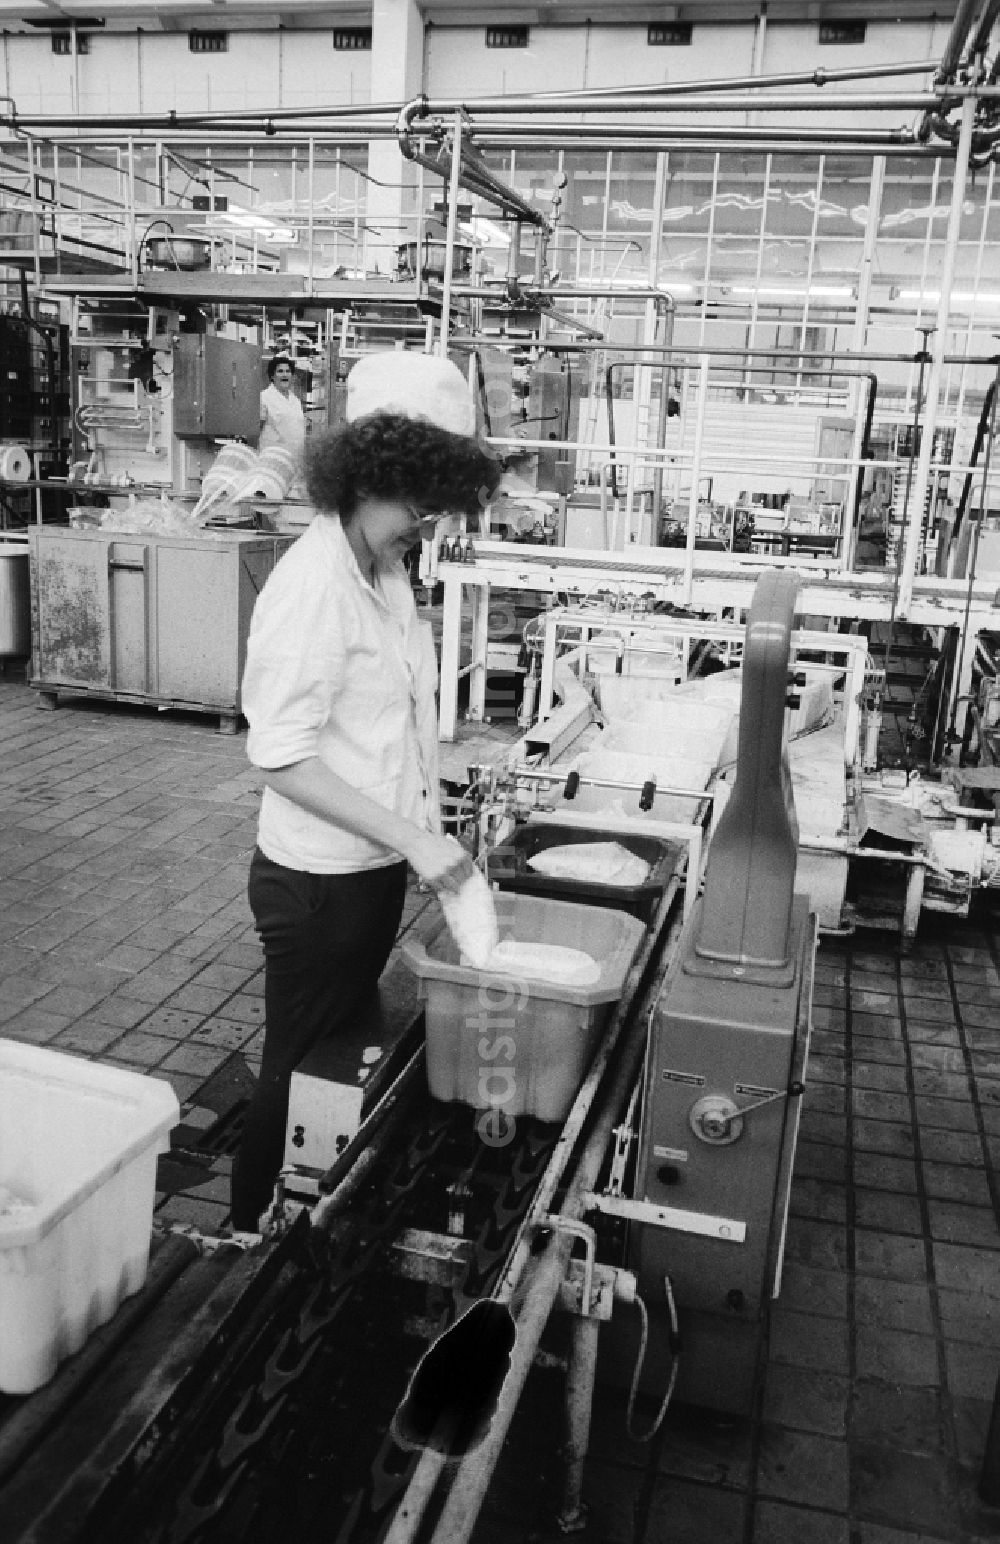 GDR image archive: Berlin - An employee controls the tare weight of the fresh milk bags in the milk court VEB Berlin in Pankow Heiner's village in Berlin, the former capital of the GDR, German democratic republic